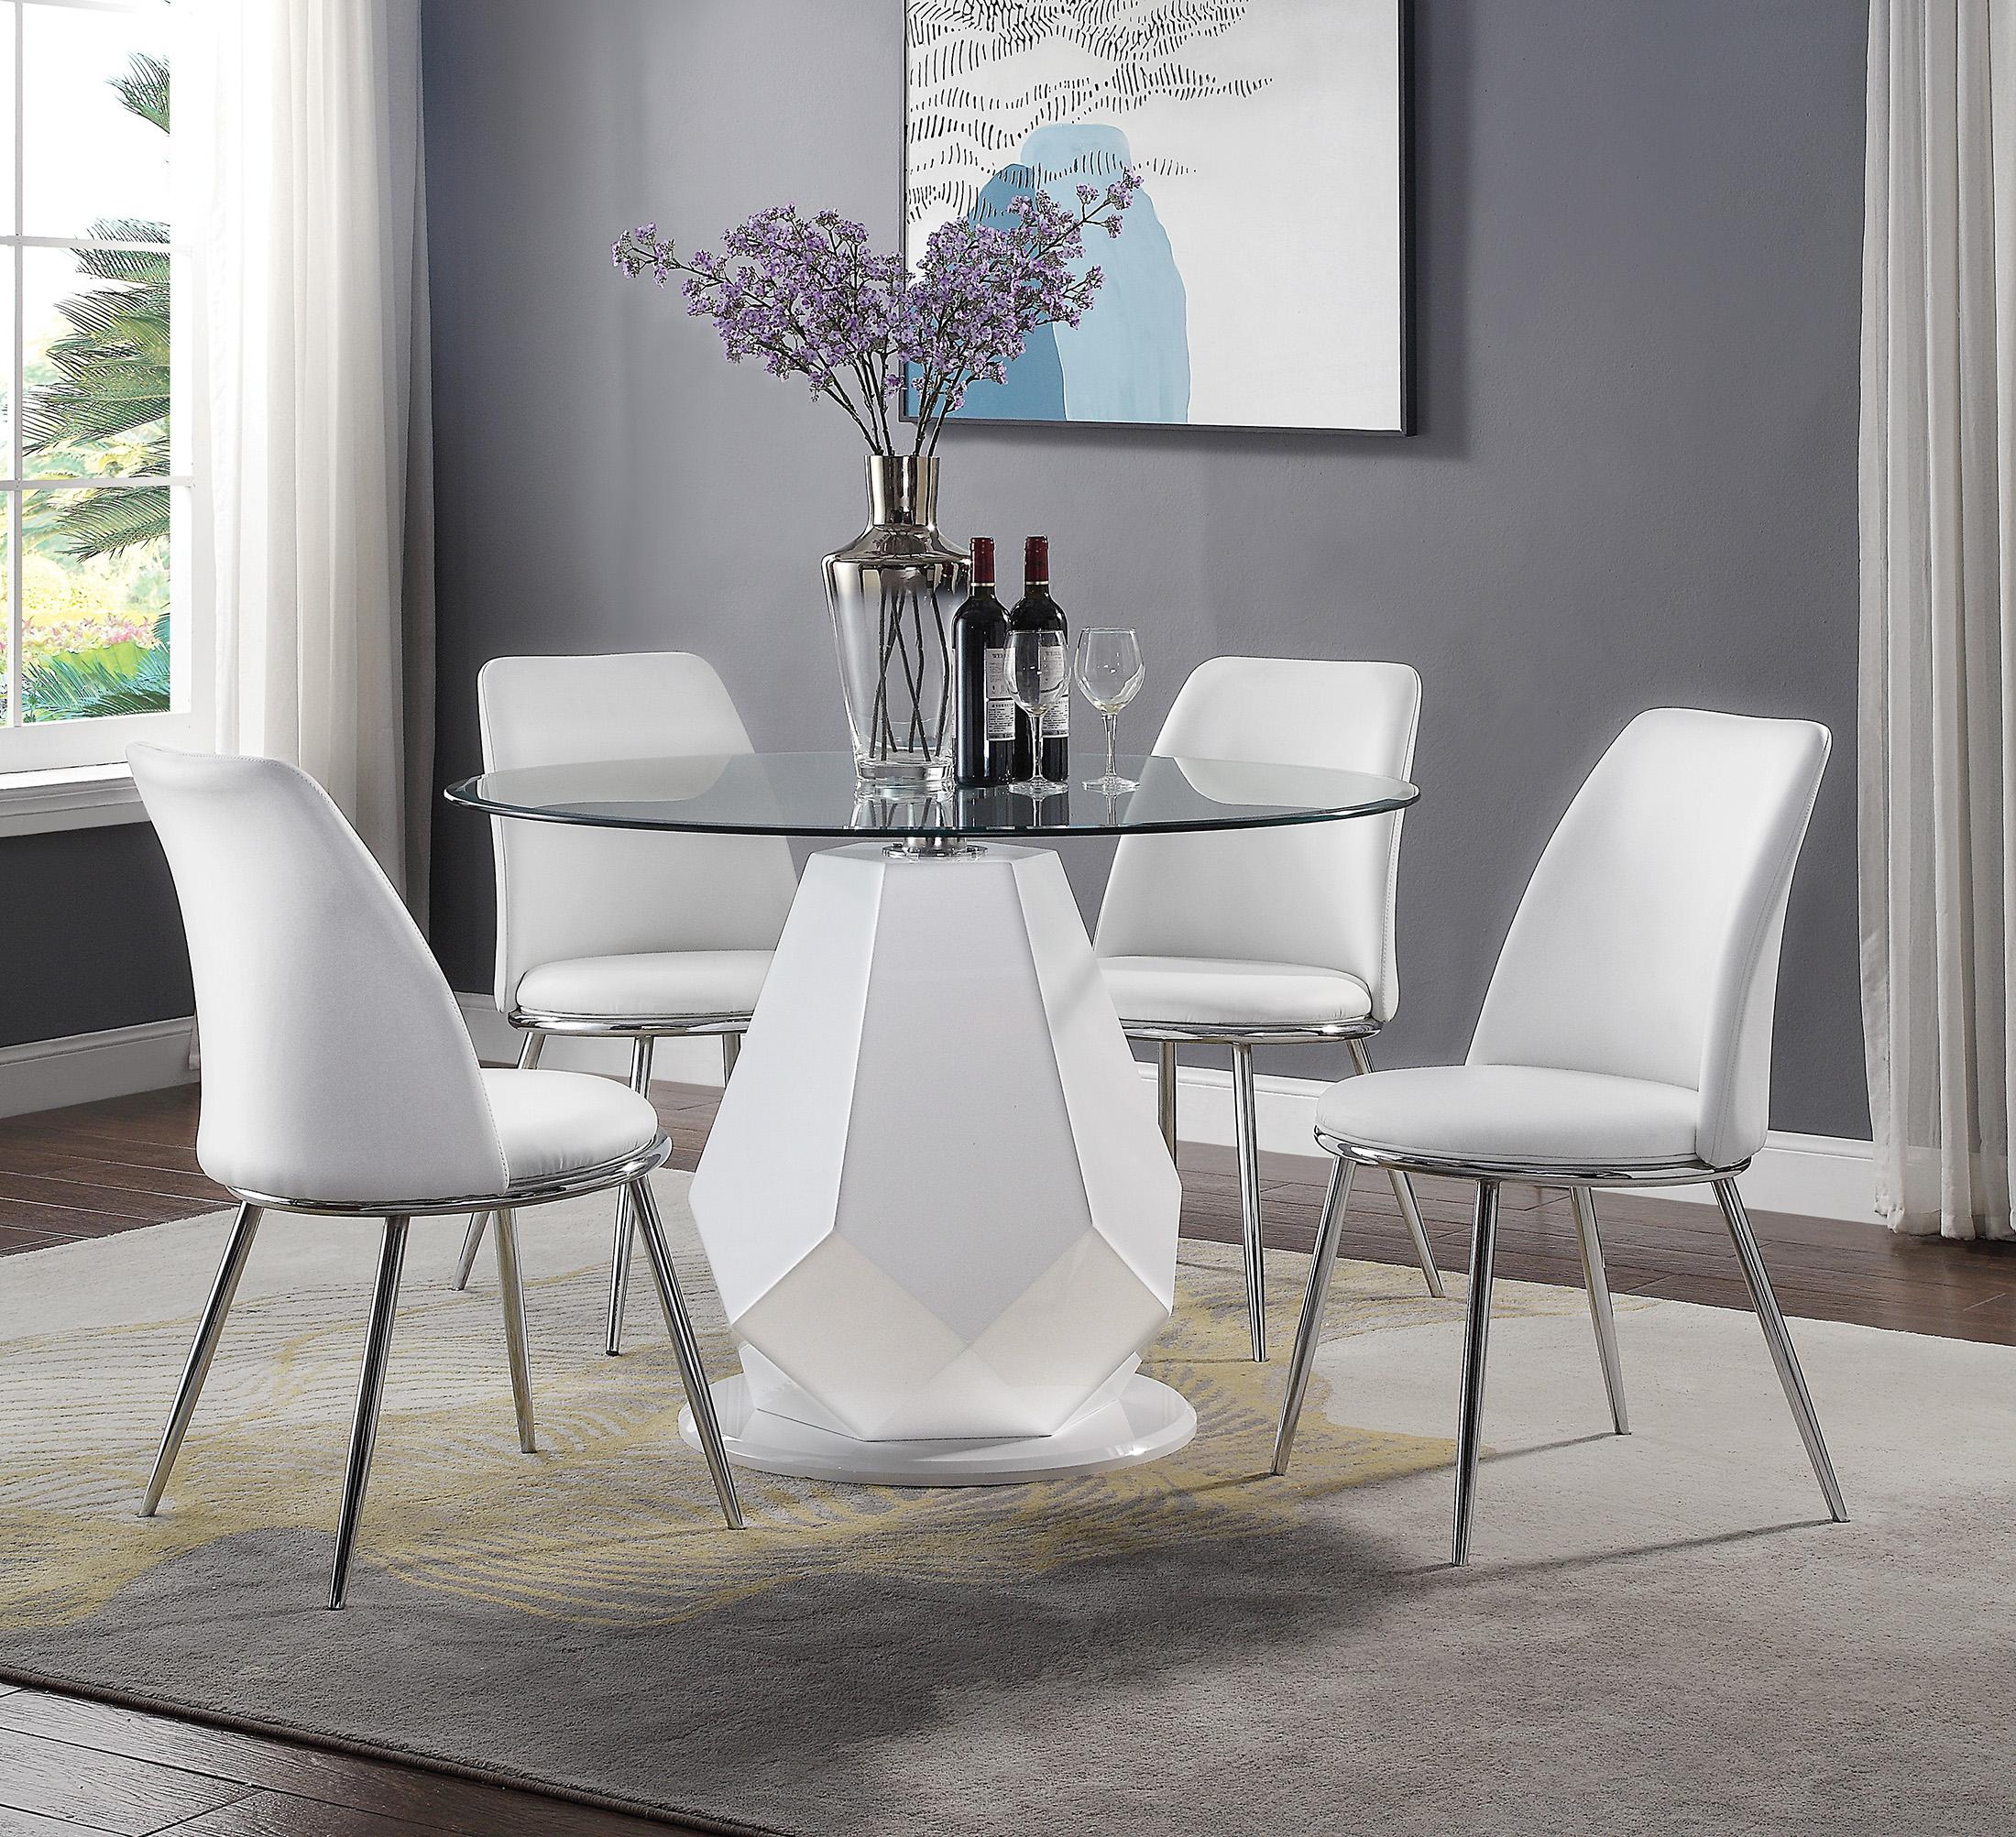 

    
Chic Round Glass Top Glossy White Dining Table Set 5Pcs Acme Chara Contemporary
